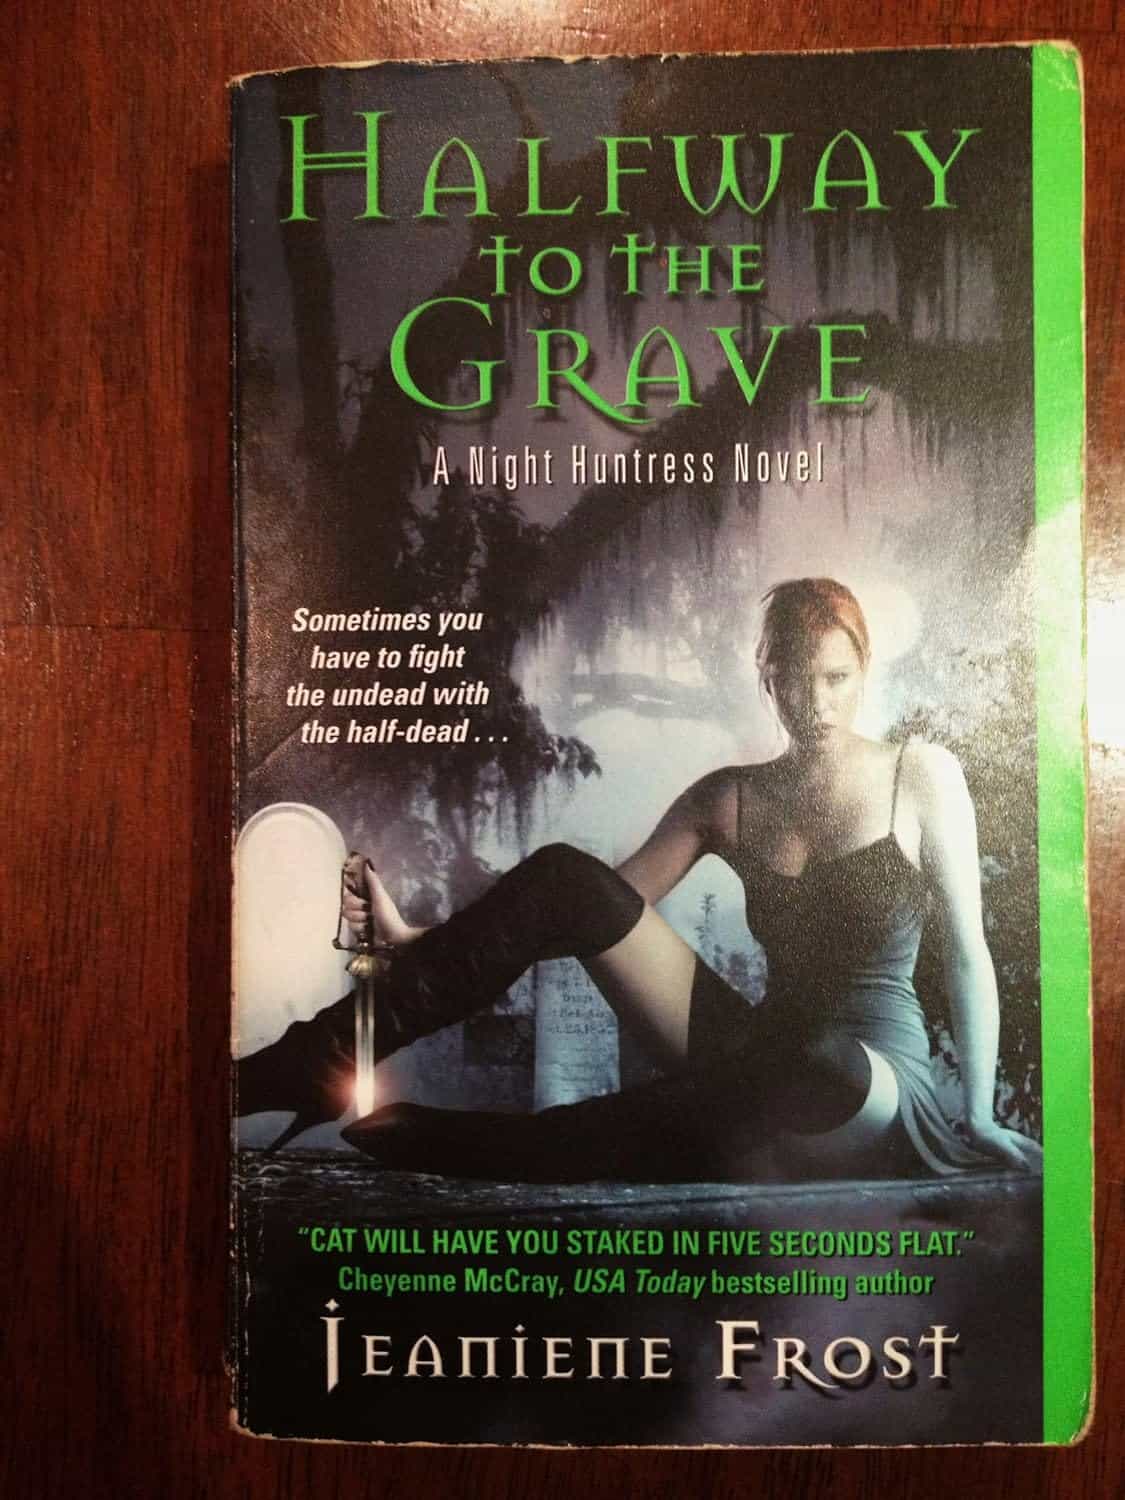 Halfway To The Grave by Jeaniene Frost